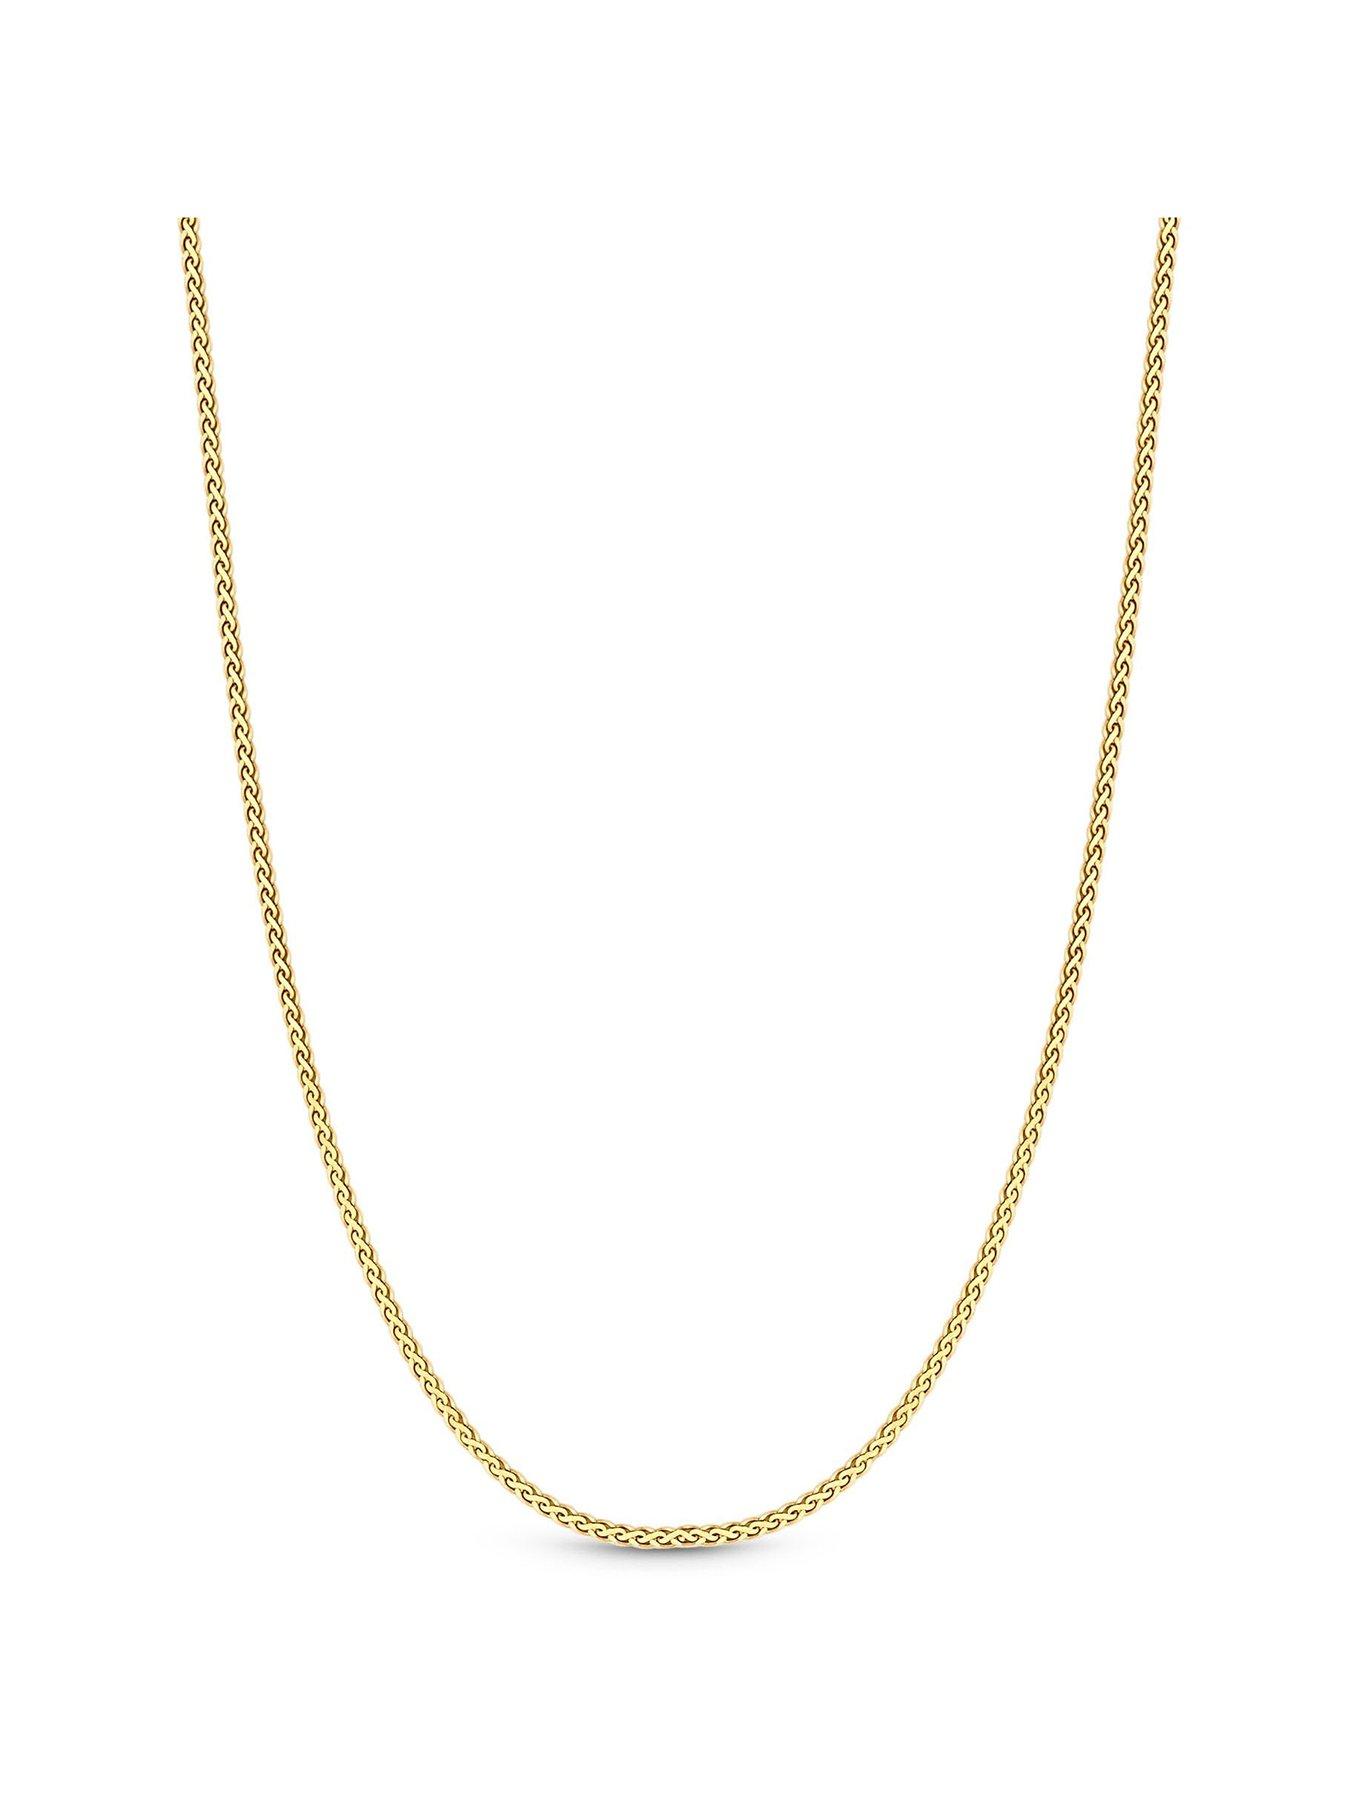 Jewellery & watches Sterling Silver 925 12ct Yellow Gold Polished Mini Twist Chain Allway